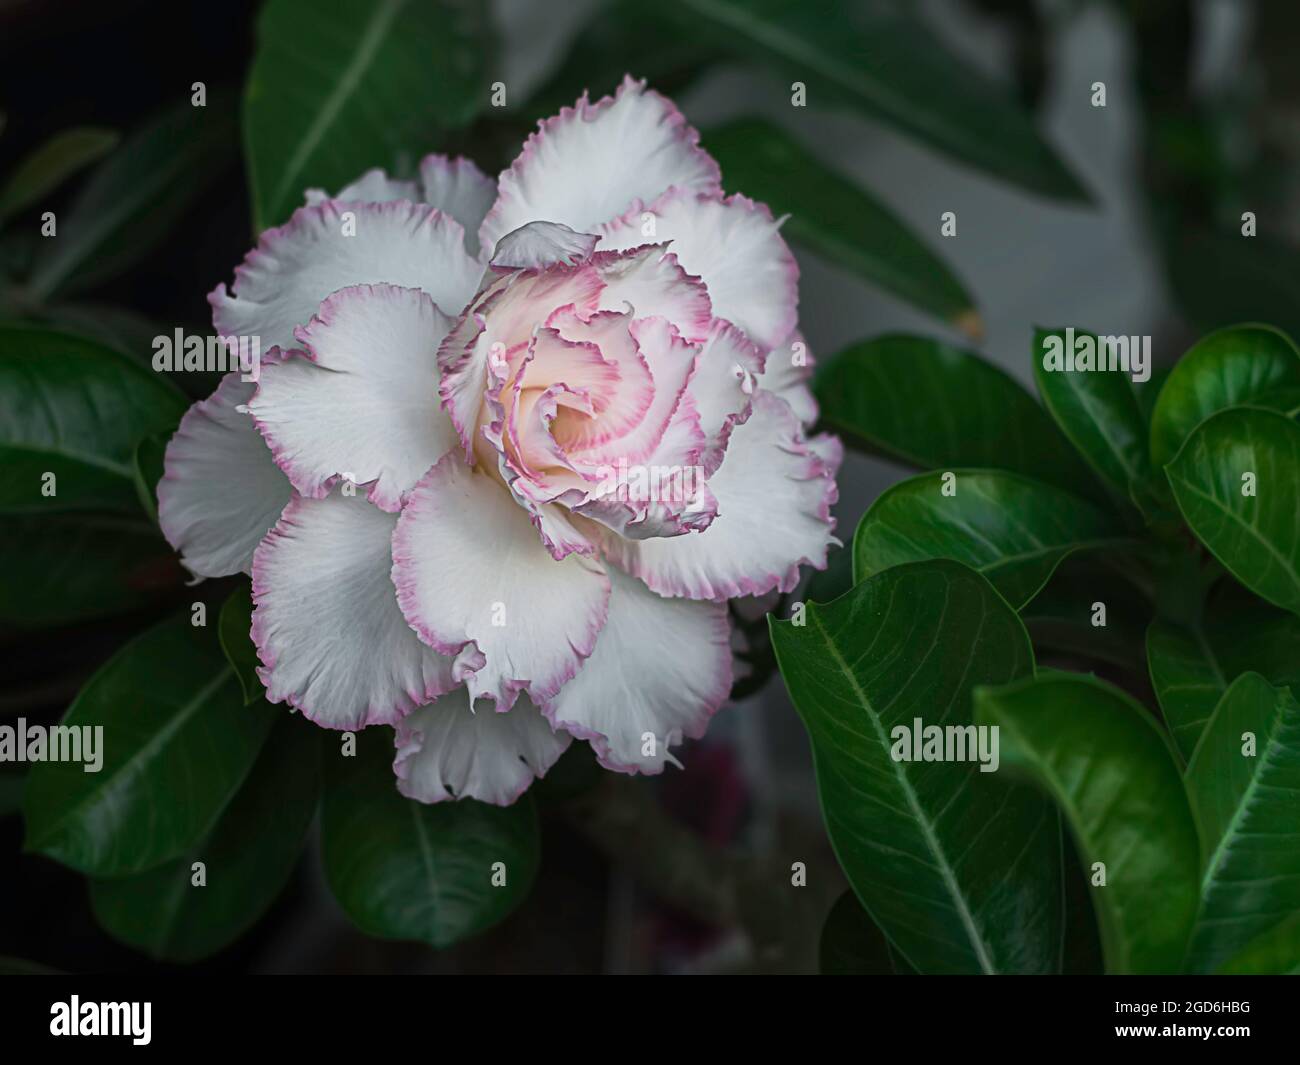 White desert rose, other names adenium obesum. Blooming white adenium, obesum, desert rose, flowers surrounded by green leaf with blurred background. Stock Photo